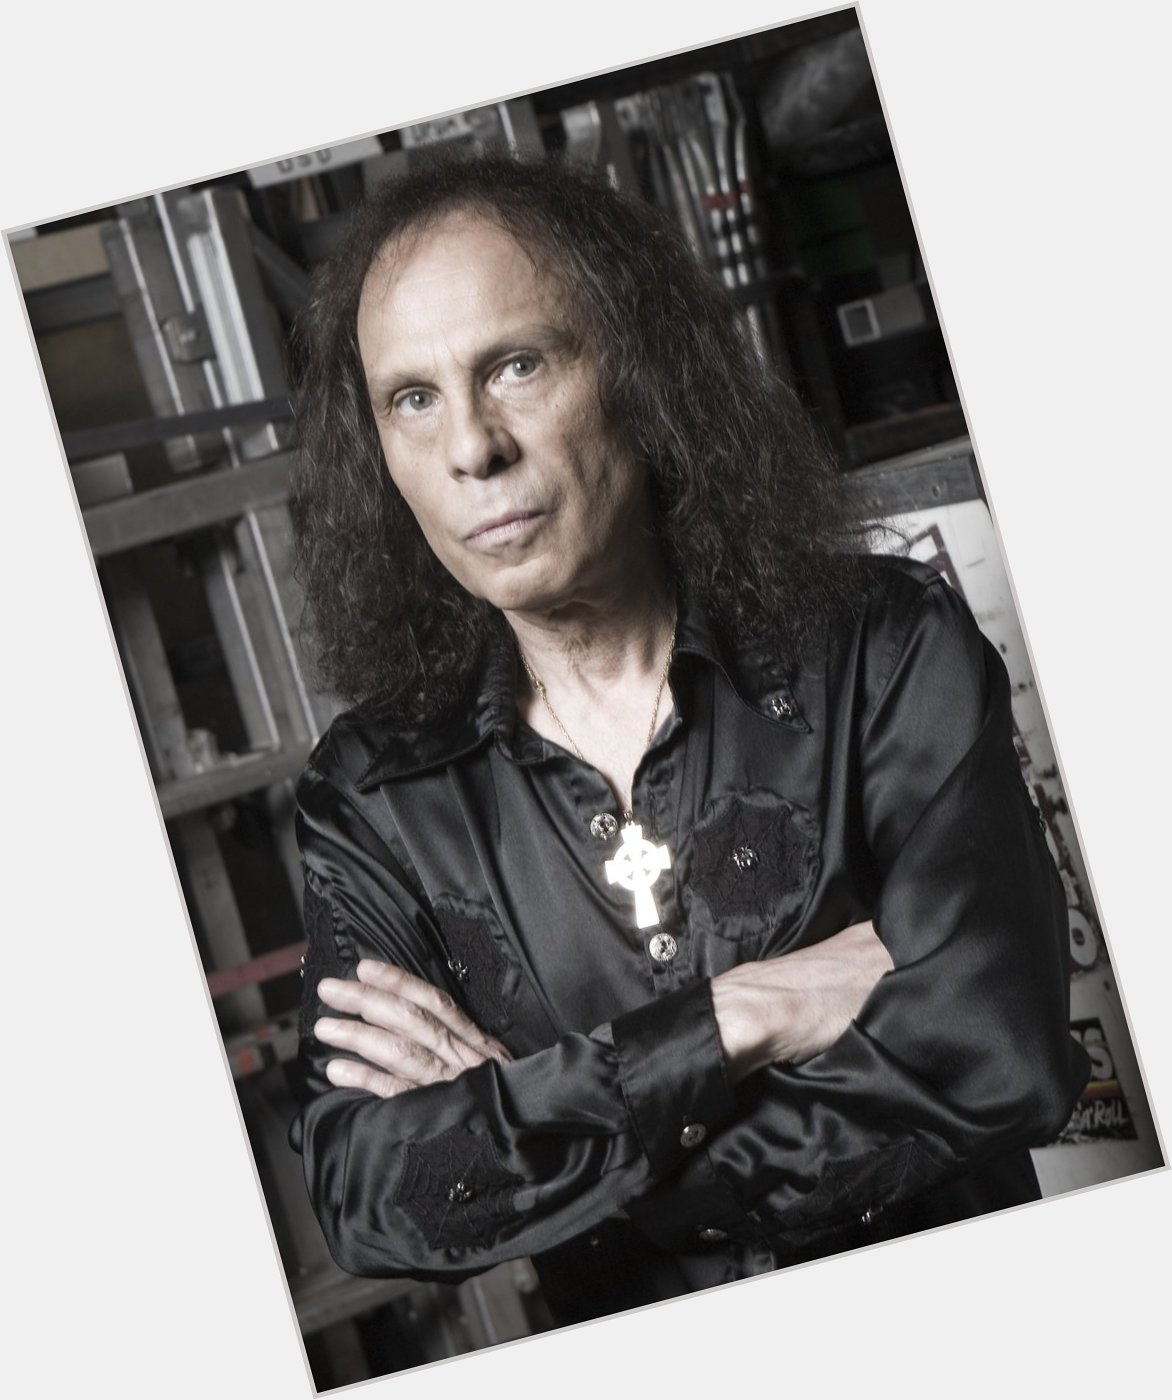 Happy Birthday to Ronnie James Dio who would\ve been 75 today 